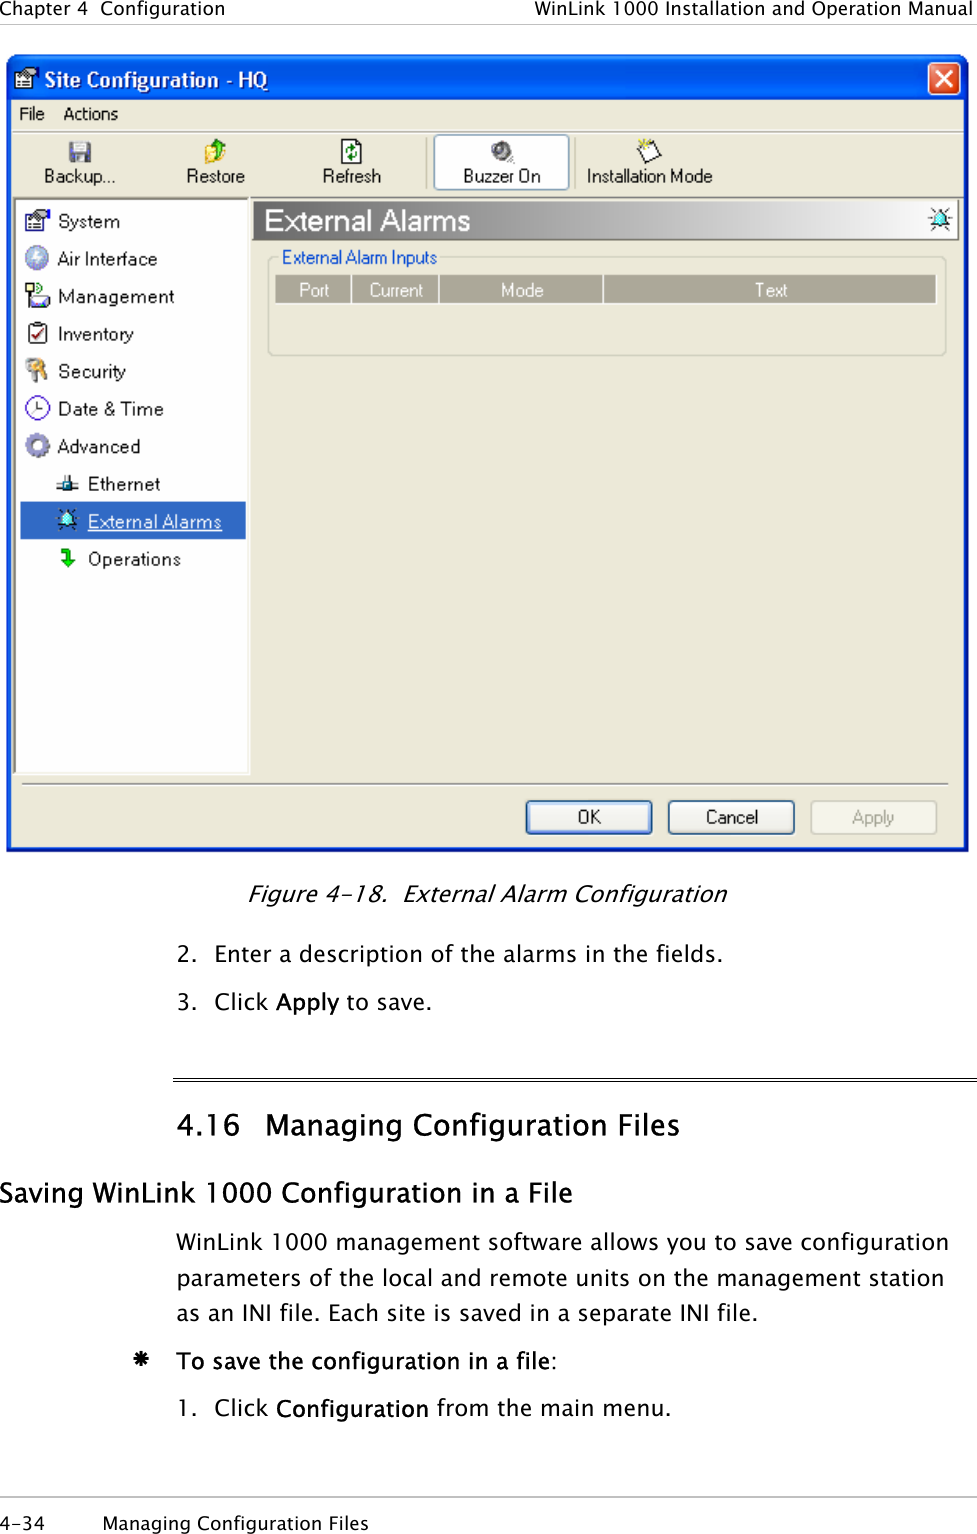 Chapter  4  Configuration  WinLink 1000 Installation and Operation Manual  Figure  4-18.  External Alarm Configuration 2. Enter a description of the alarms in the fields. 3. Click Apply to save. 4.16 Managing Configuration Files Saving WinLink 1000 Configuration in a File WinLink 1000 management software allows you to save configuration parameters of the local and remote units on the management station as an INI file. Each site is saved in a separate INI file. Æ To save the configuration in a file: 1. Click Configuration from the main menu. 4-34  Managing Configuration Files  